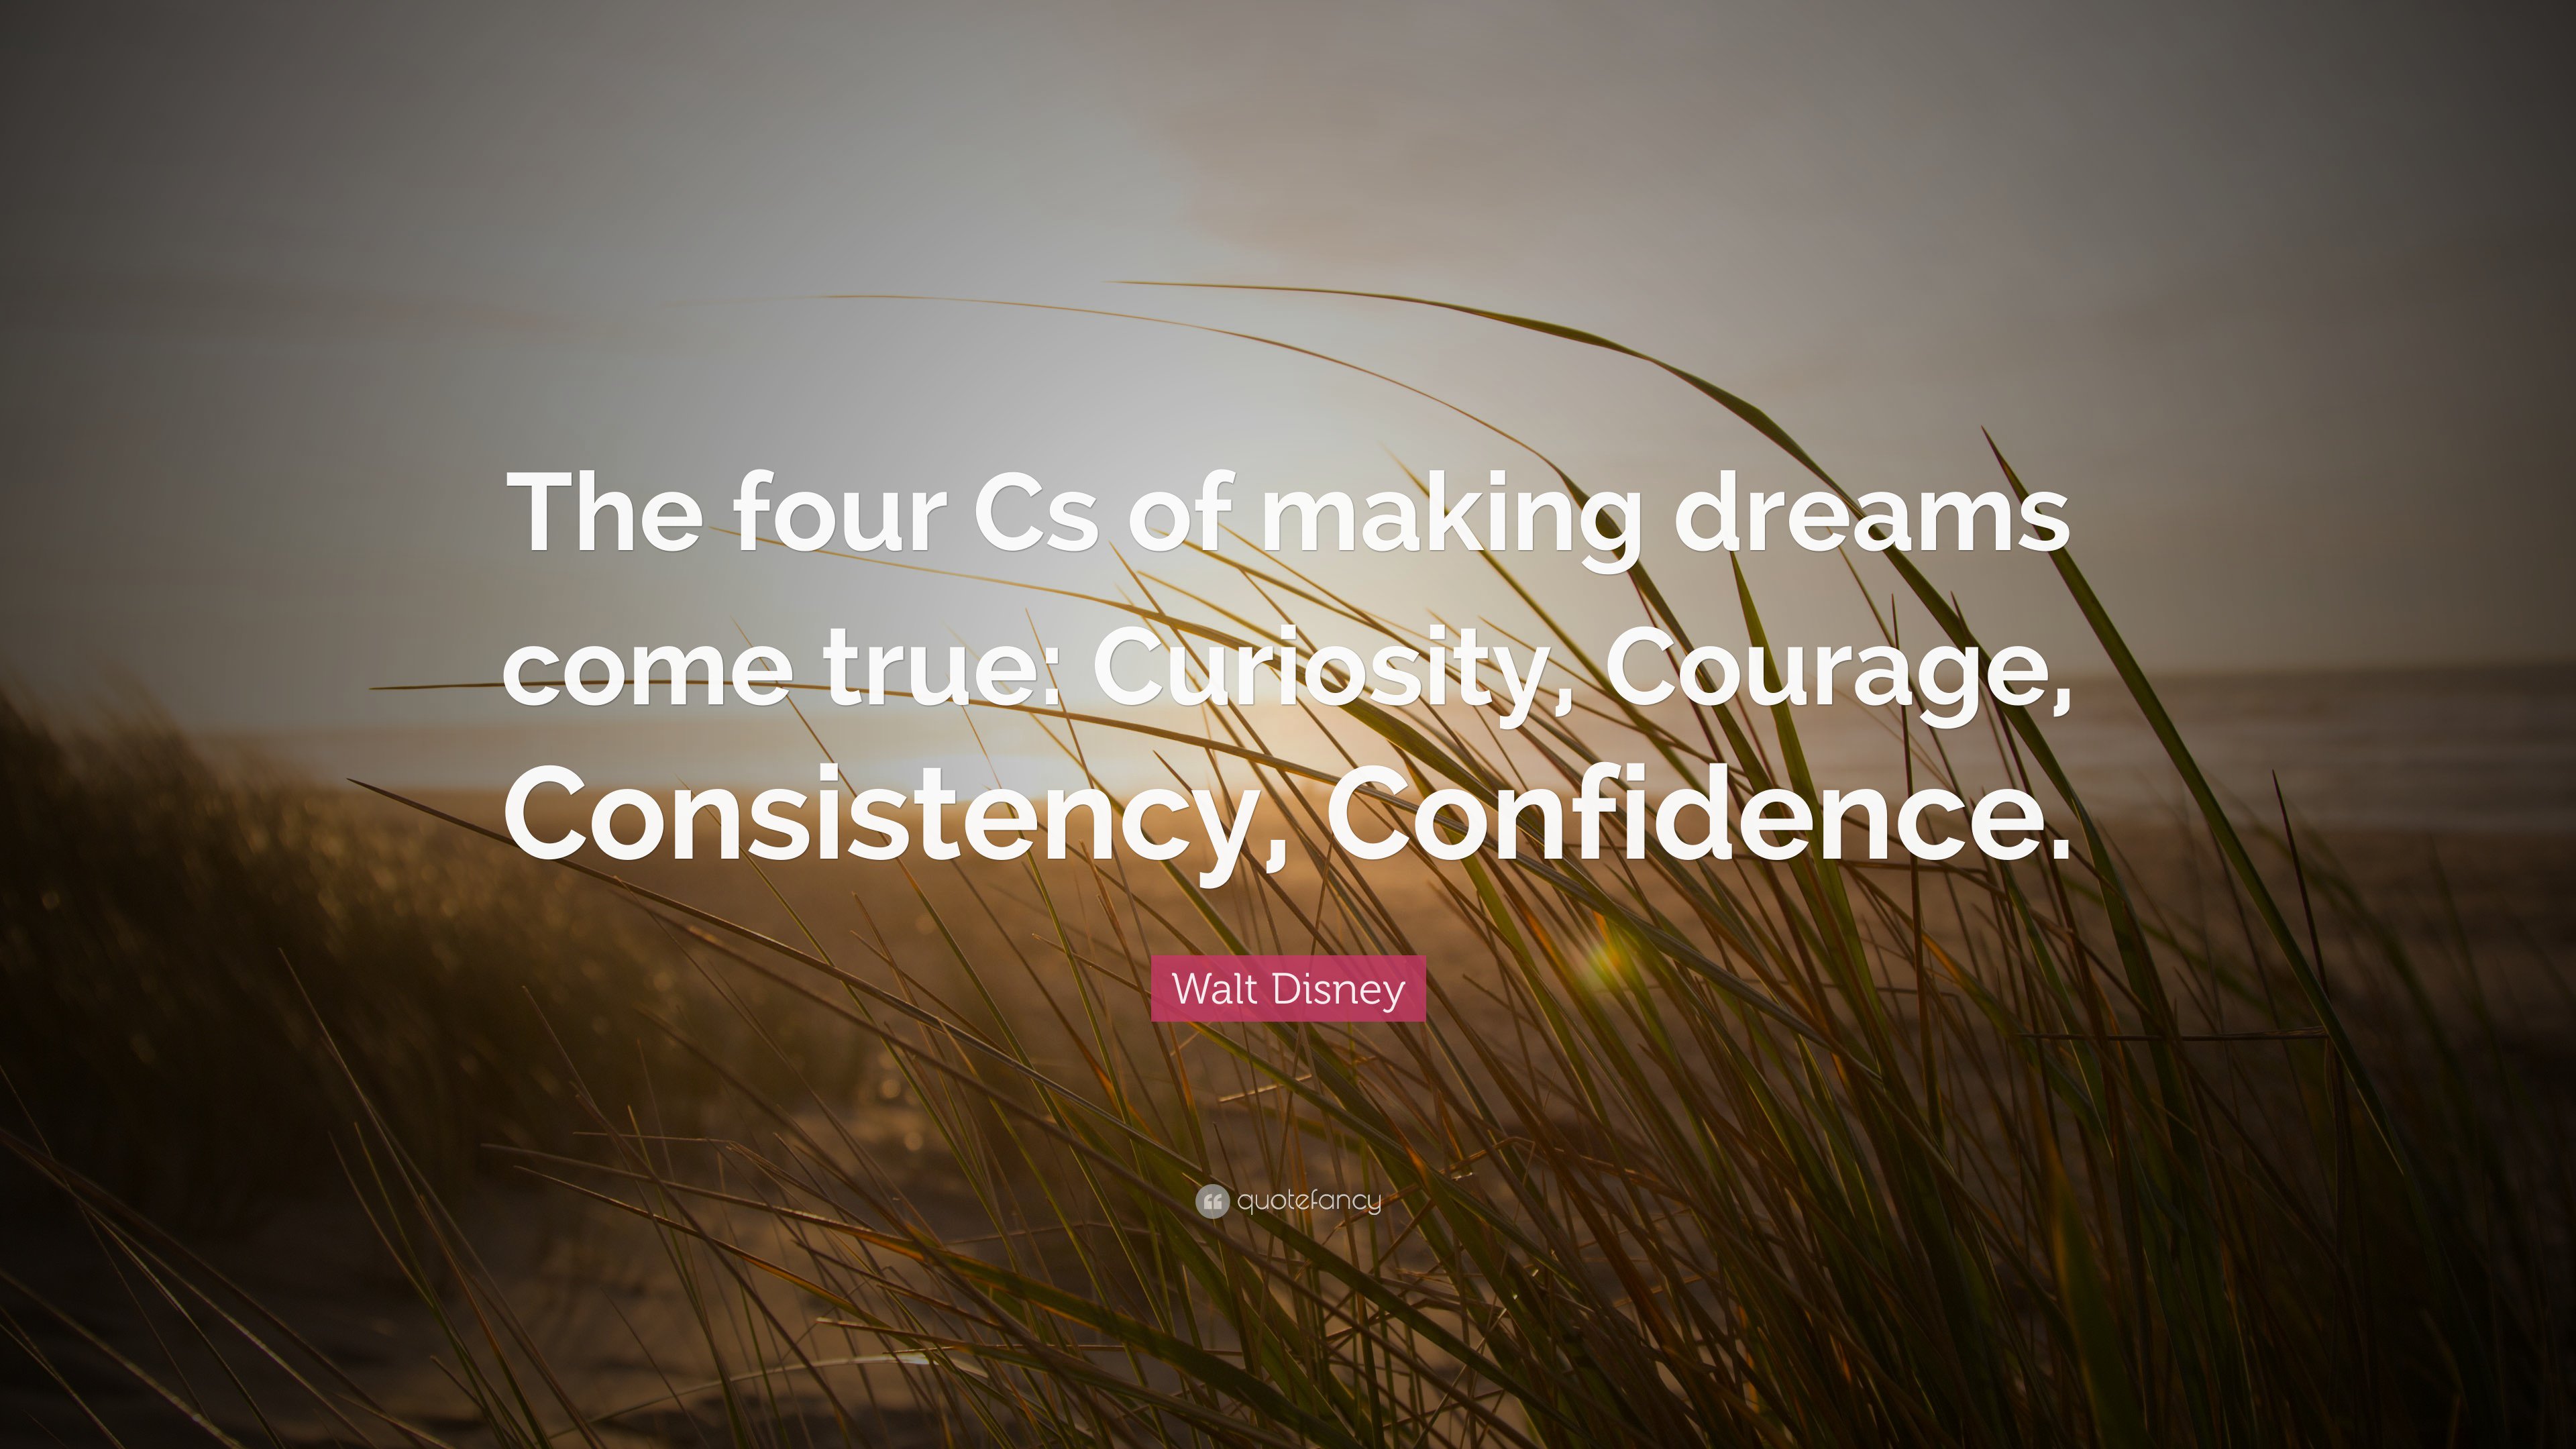 The secret to making dreams come true can be summarized by the 4 C’s. 